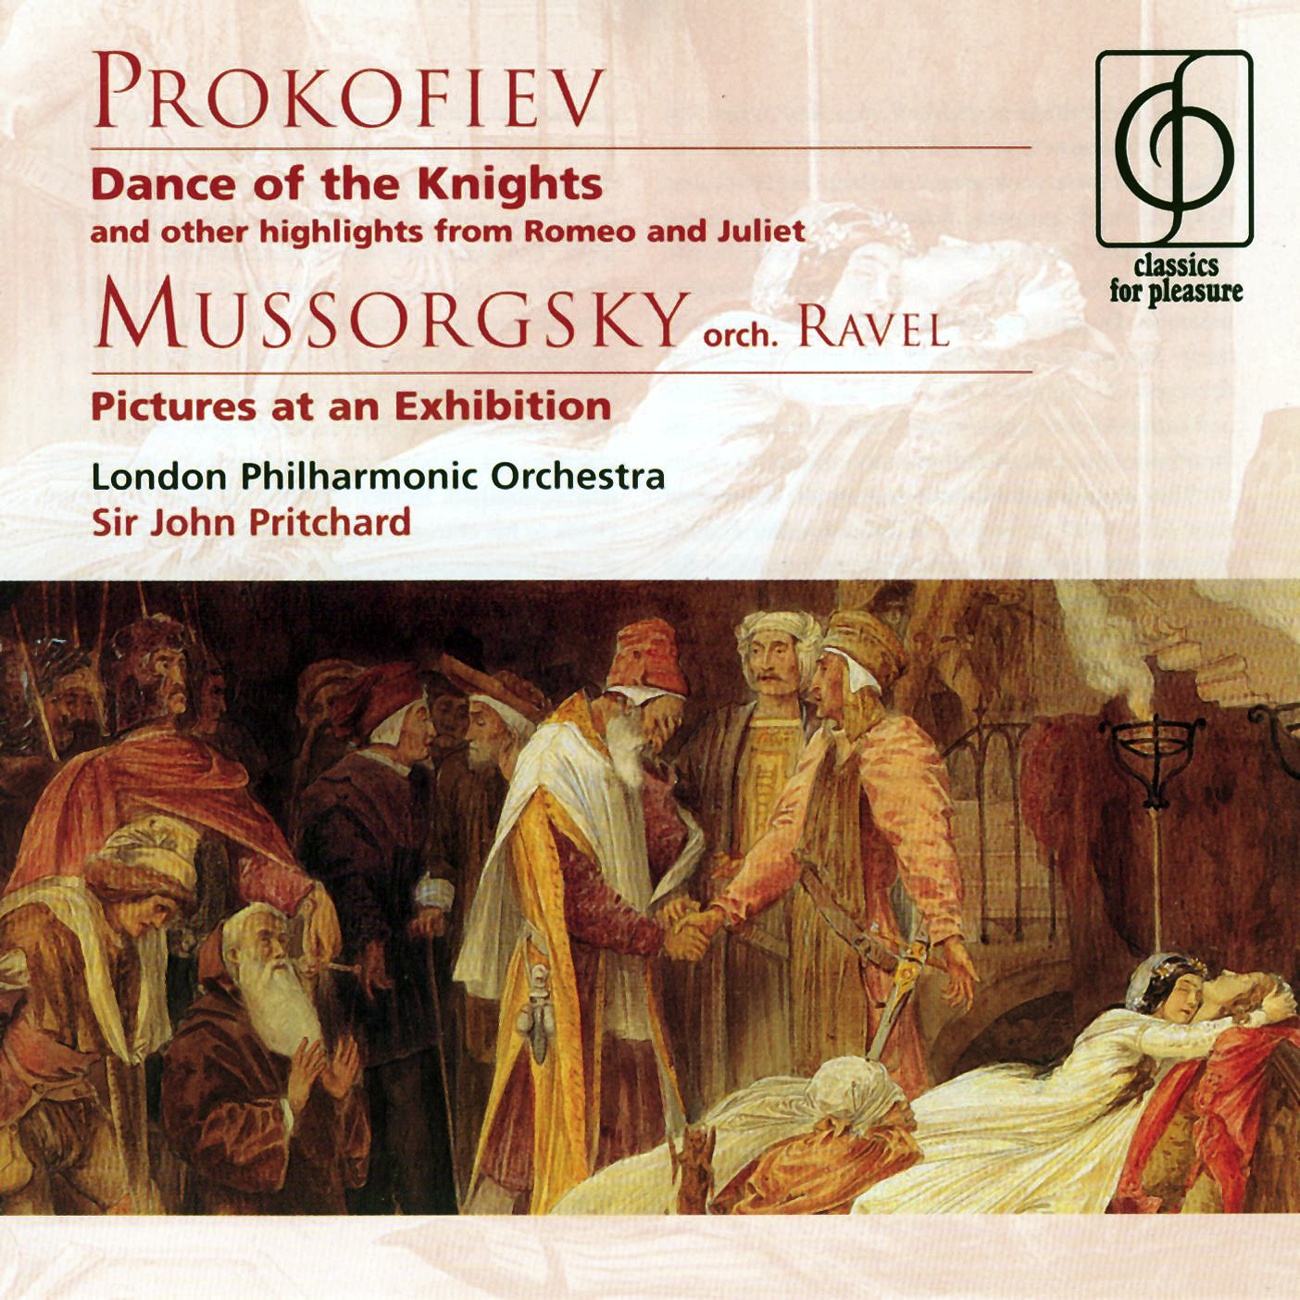 Pictures at an Exhibition (orch. Ravel) (1970 Digital Remaster): In the Tuileries